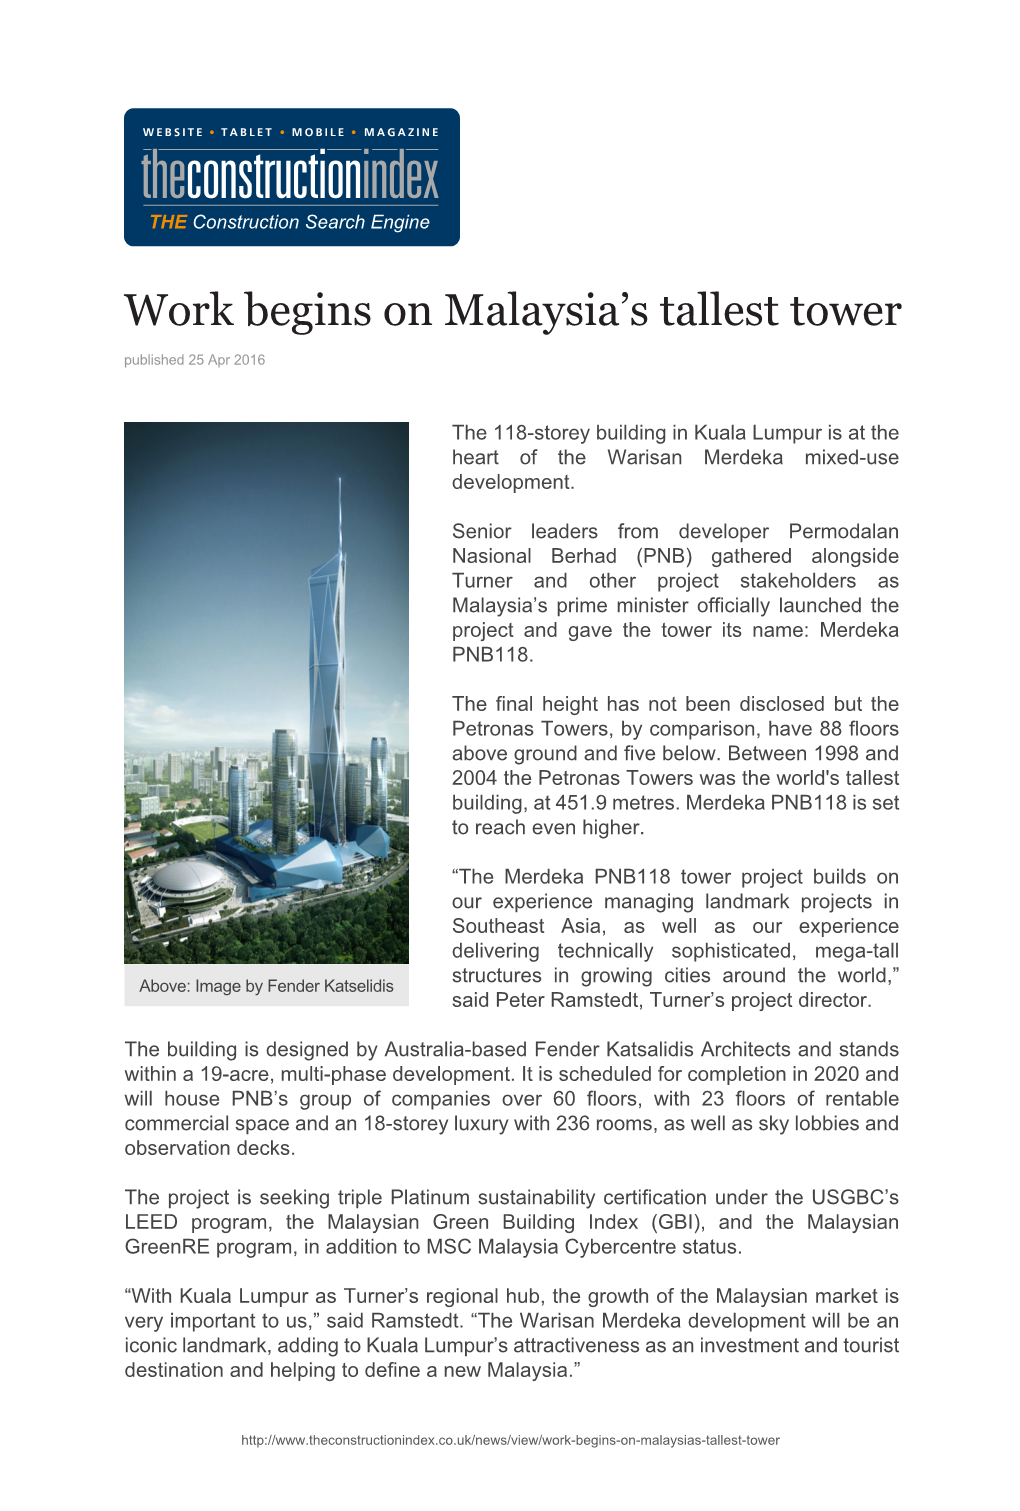 Work Begins on Malaysia's Tallest Tower